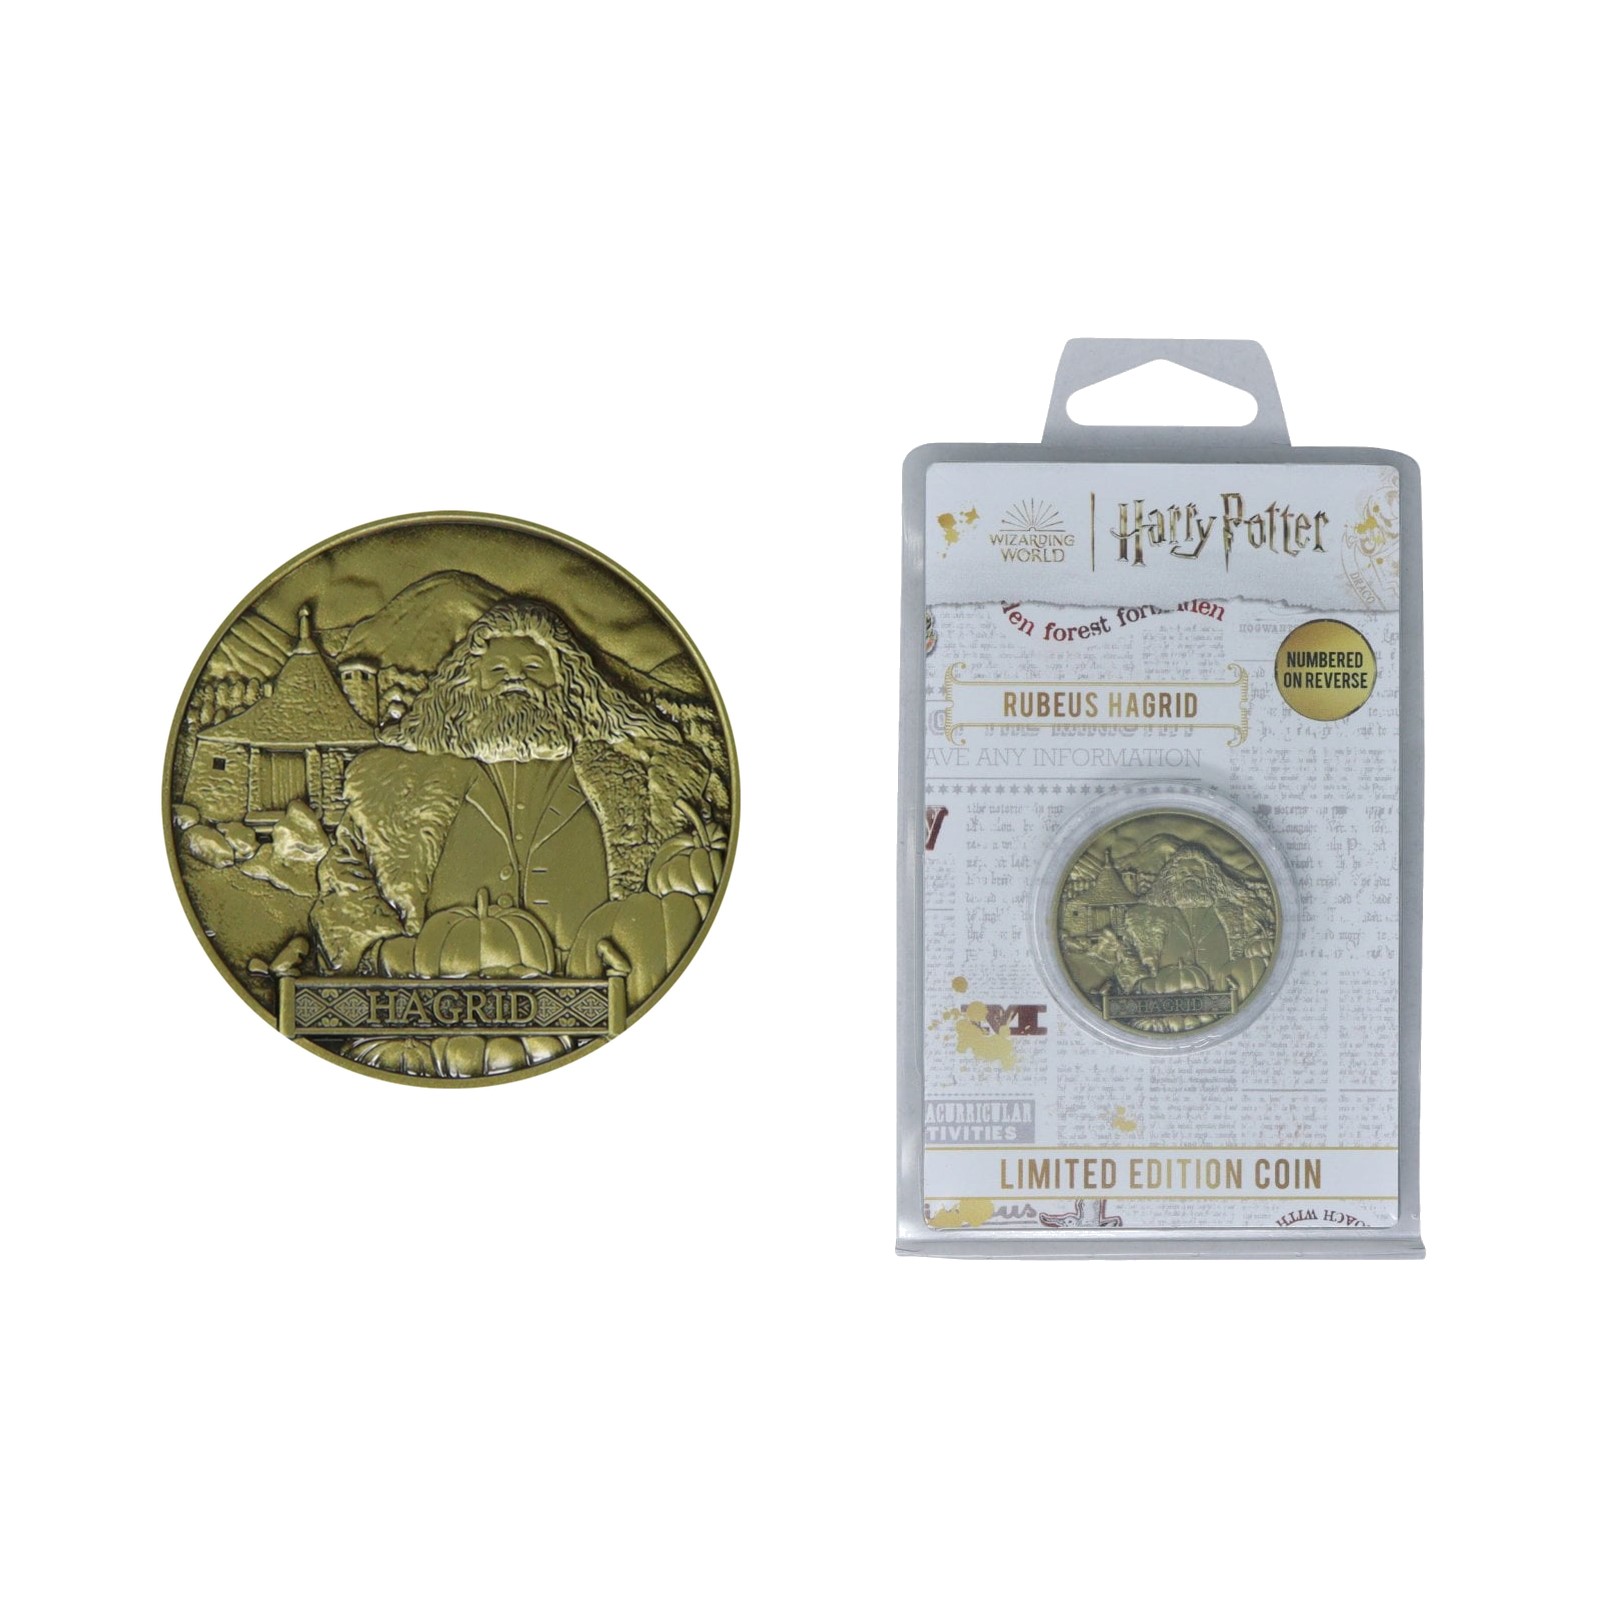 Pièce collector Harry Potter gold Hagrid 9995 exemplaire